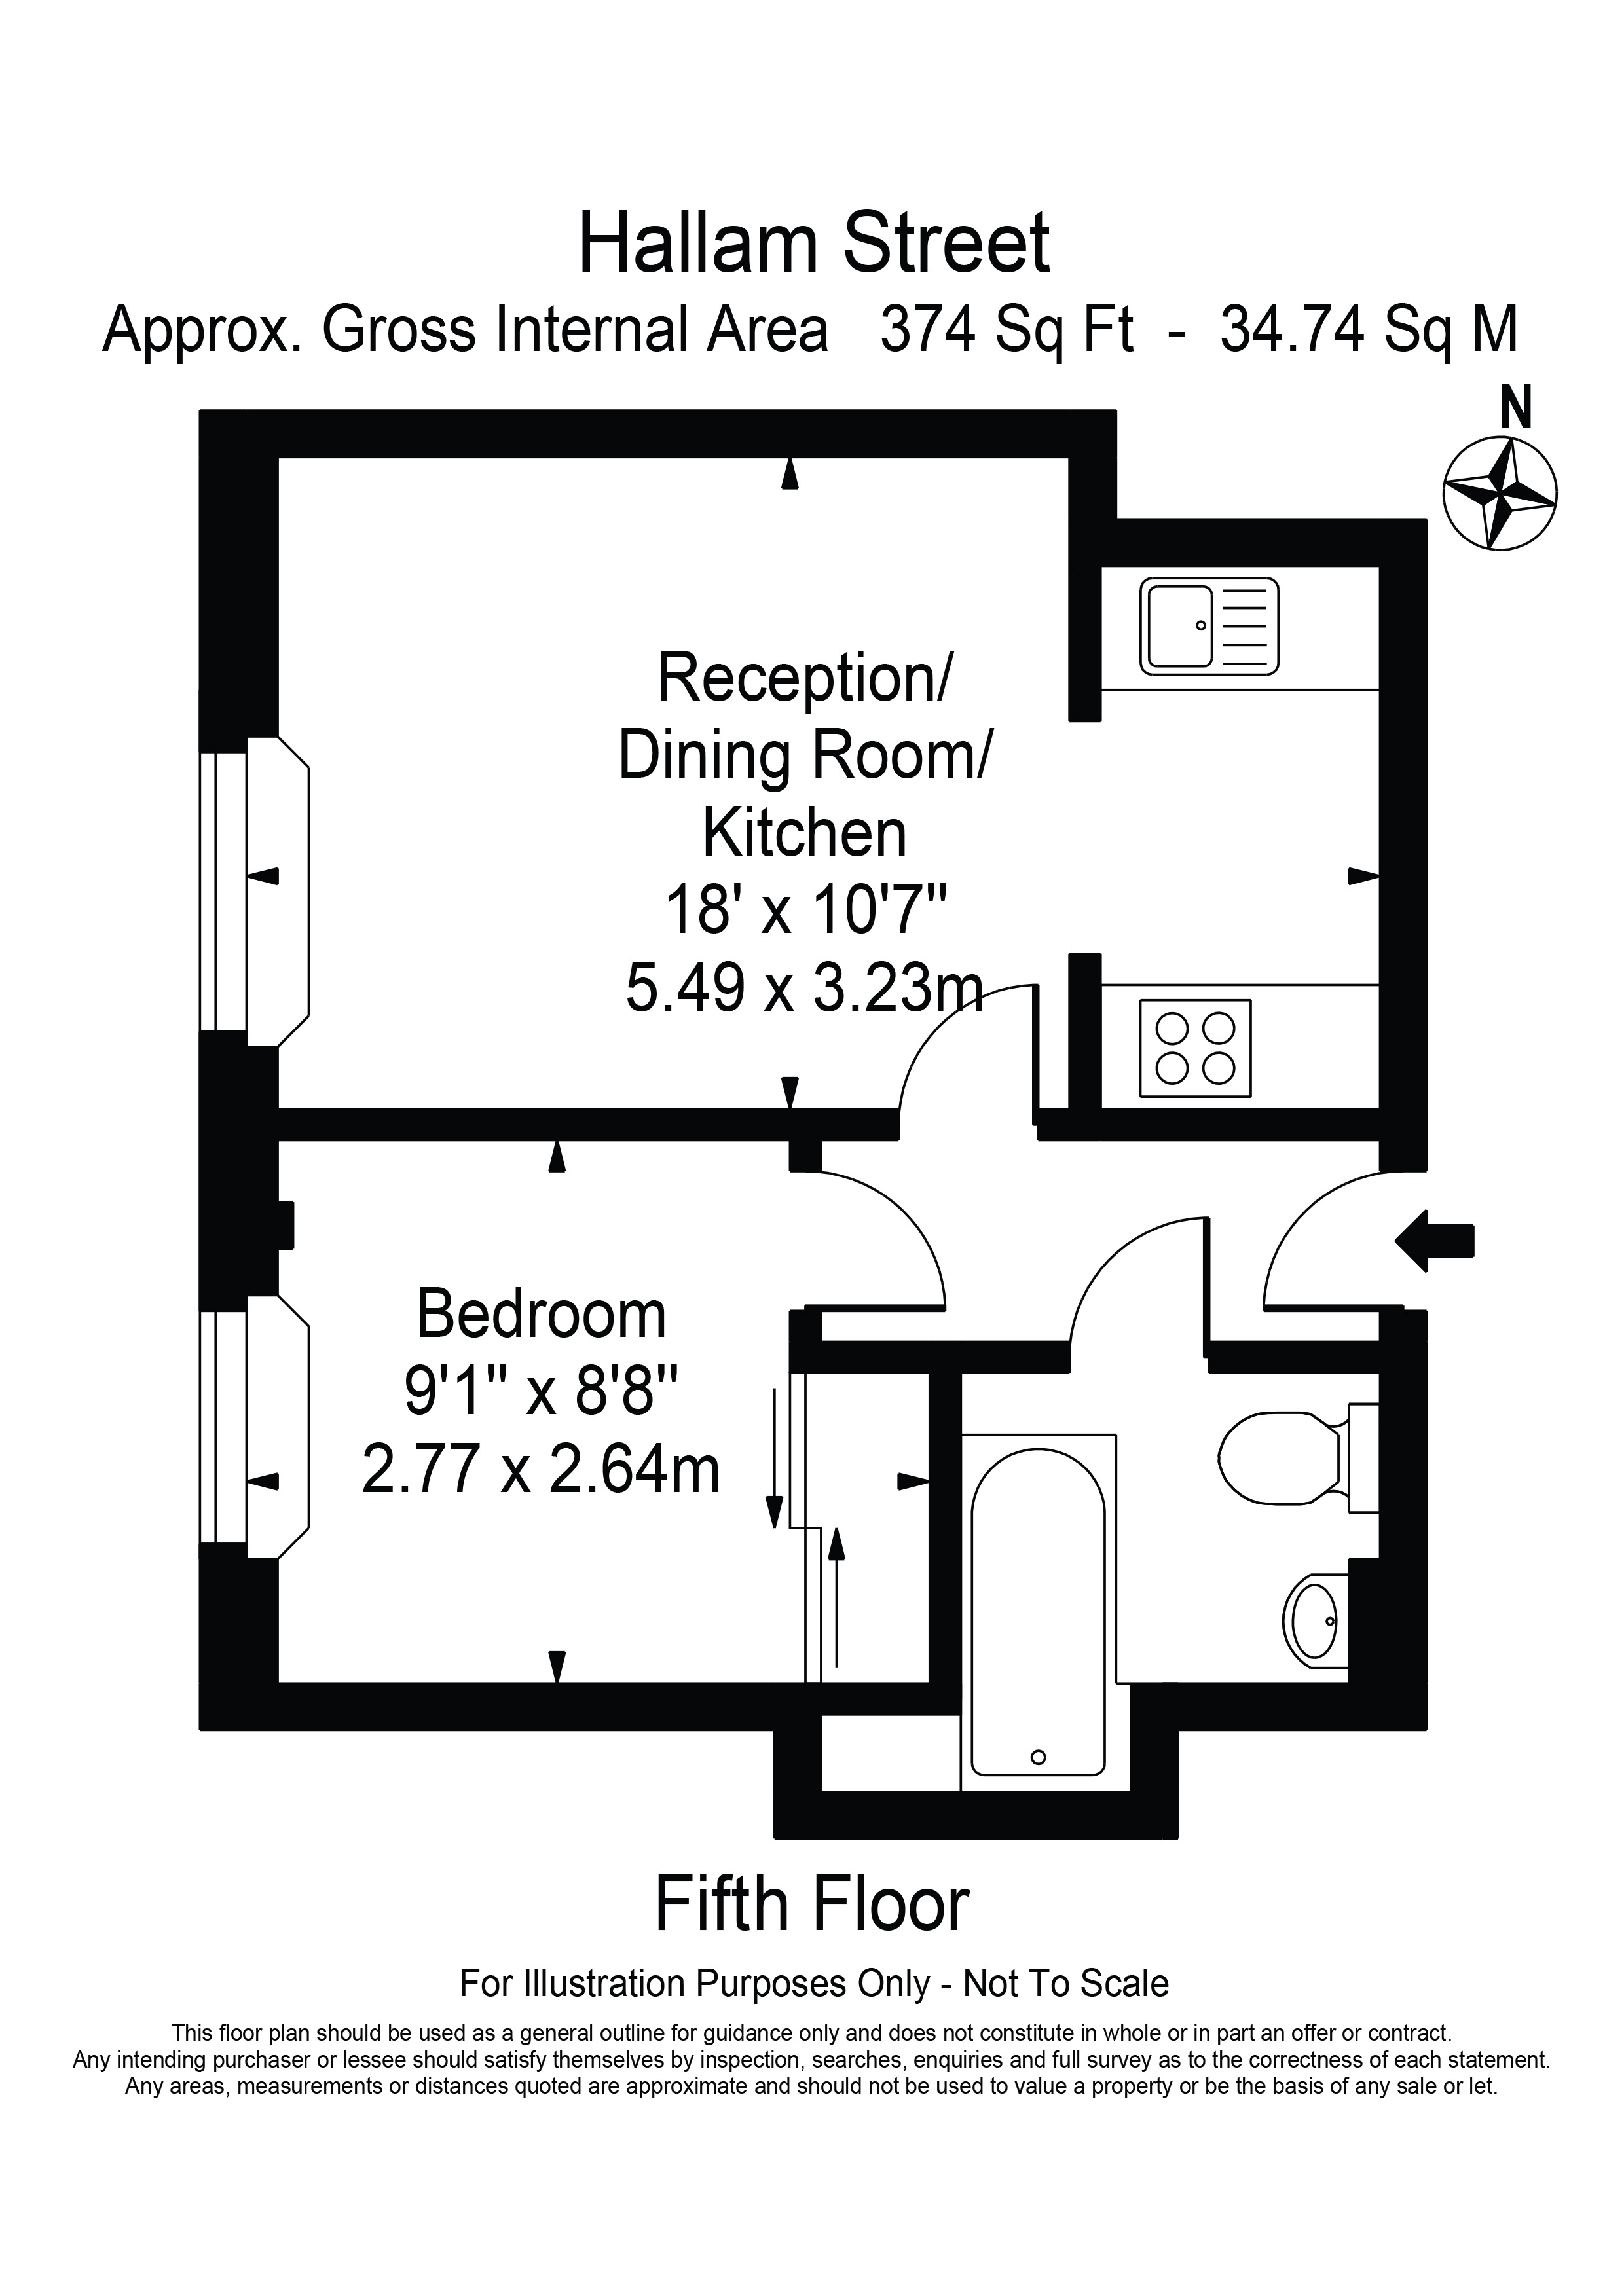 1 bed apartment for sale in Hallam Street, London - Property floorplan